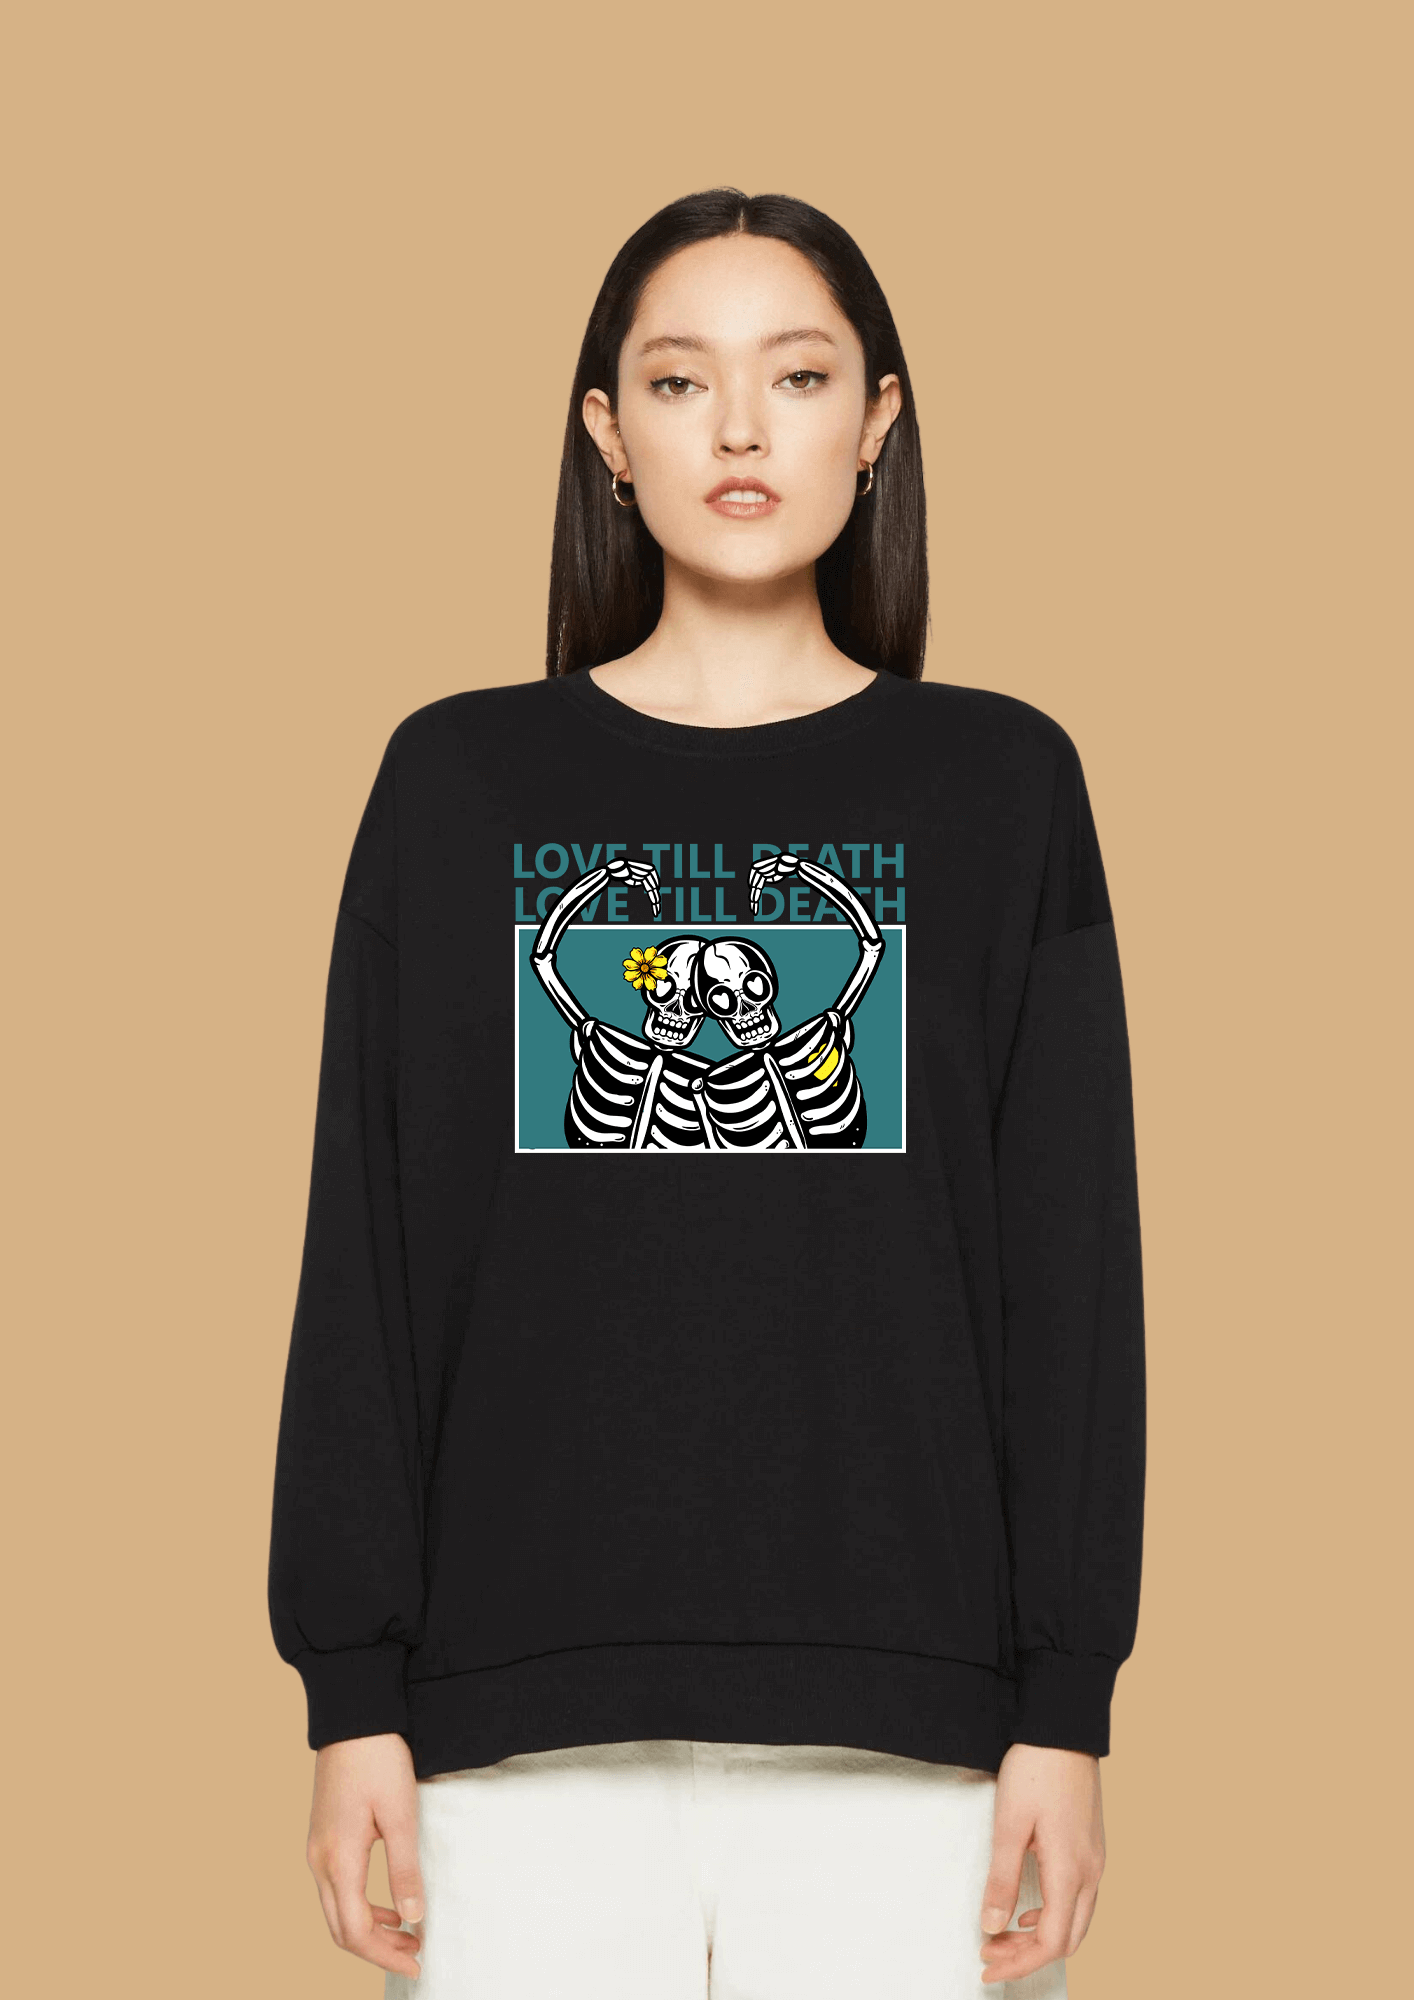 Love till death printed black color sweatshirt by offmint